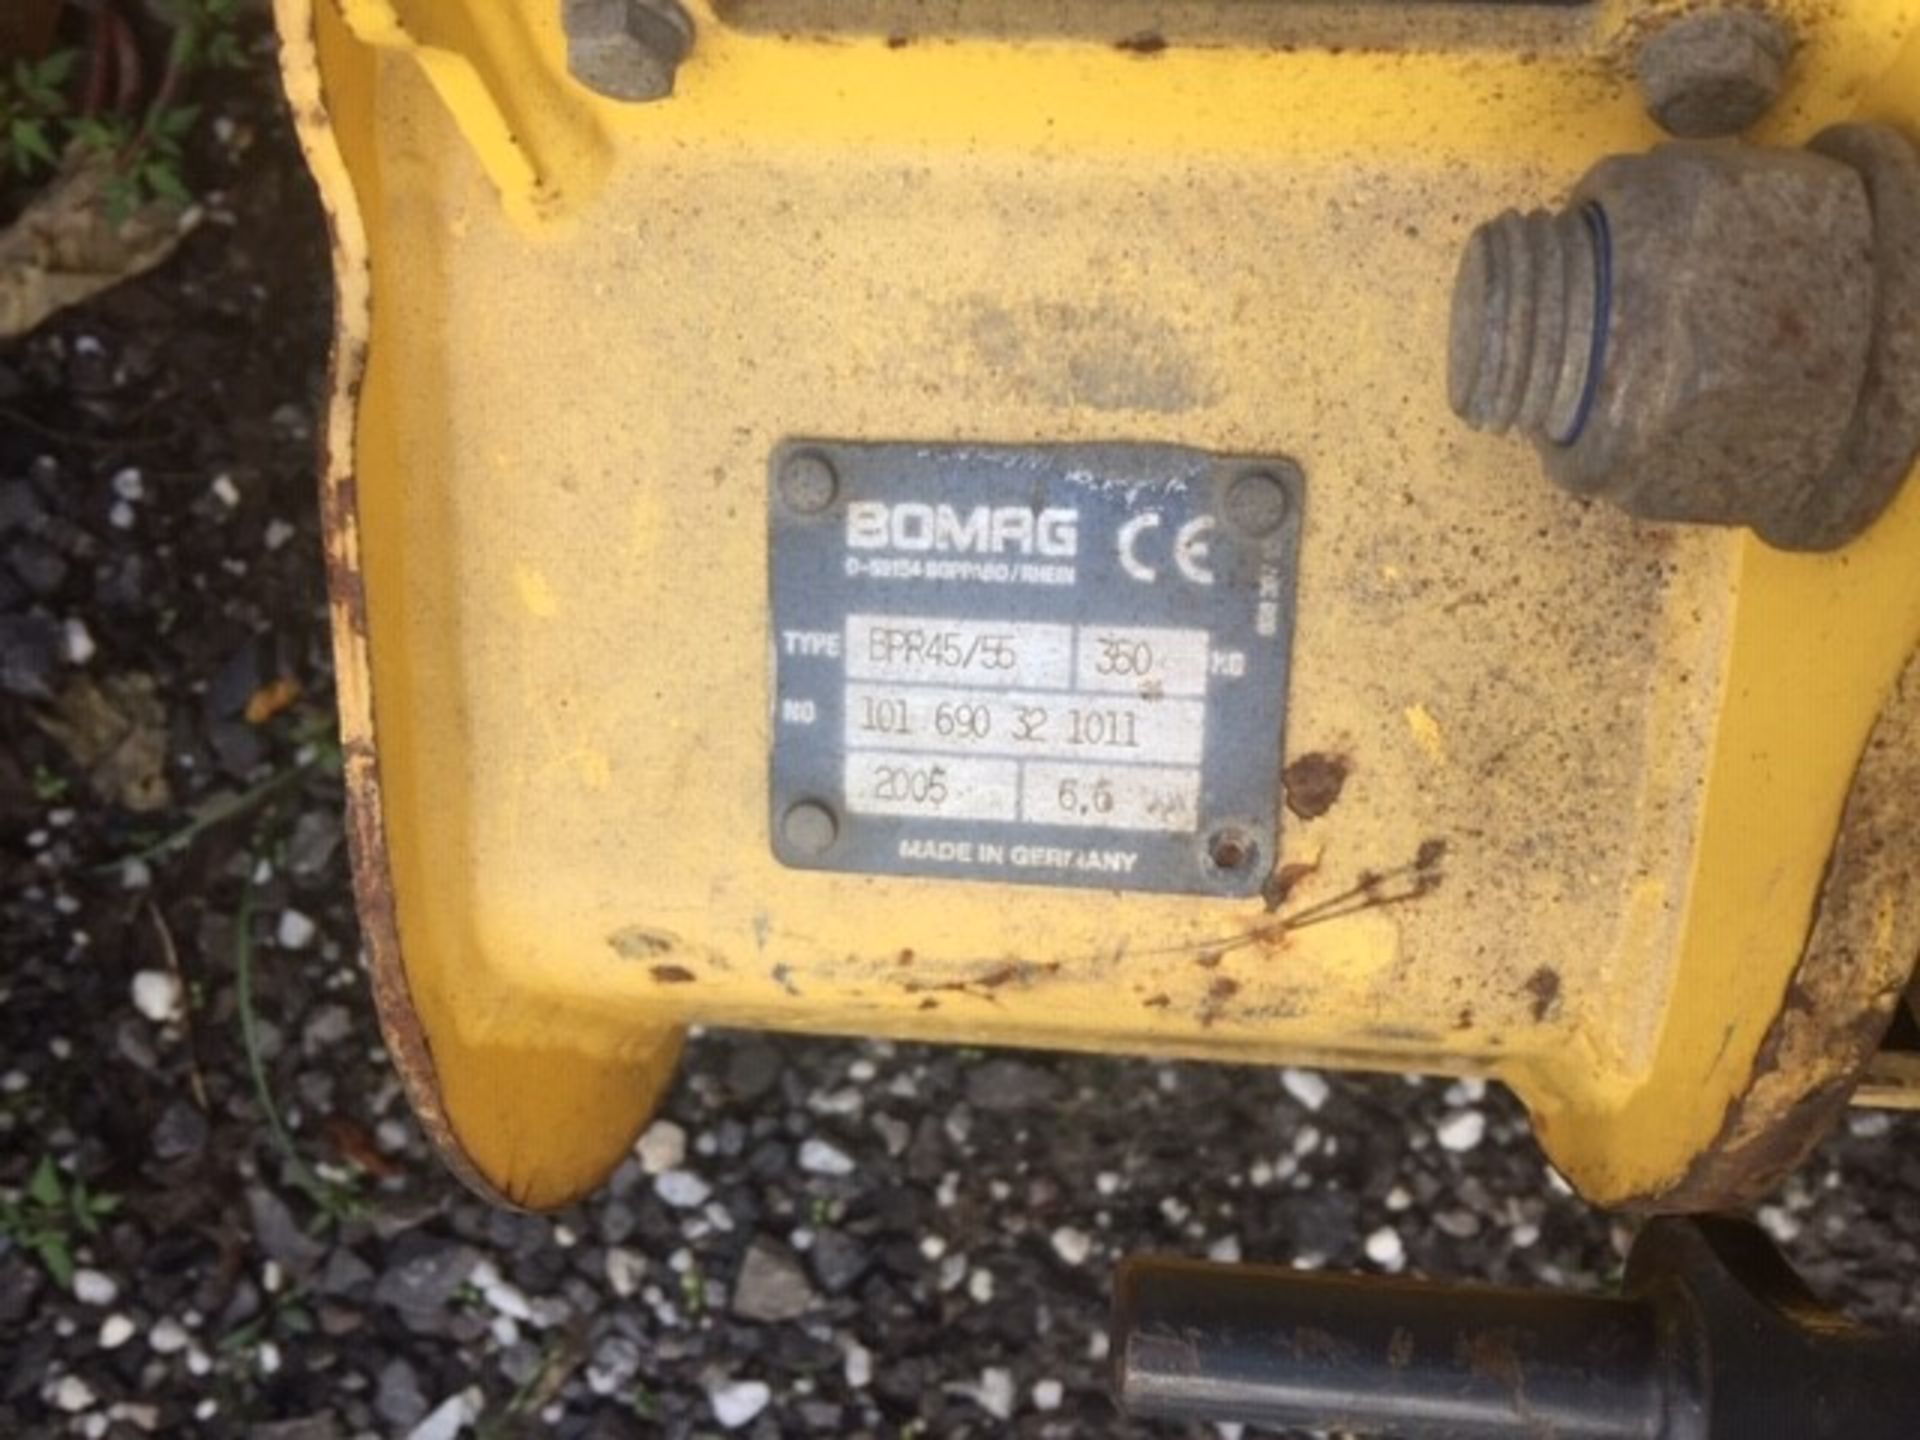 BOMAG Reversible Compactor,mod: BPR 45-55, 2005 (see photos for details) - Image 7 of 8